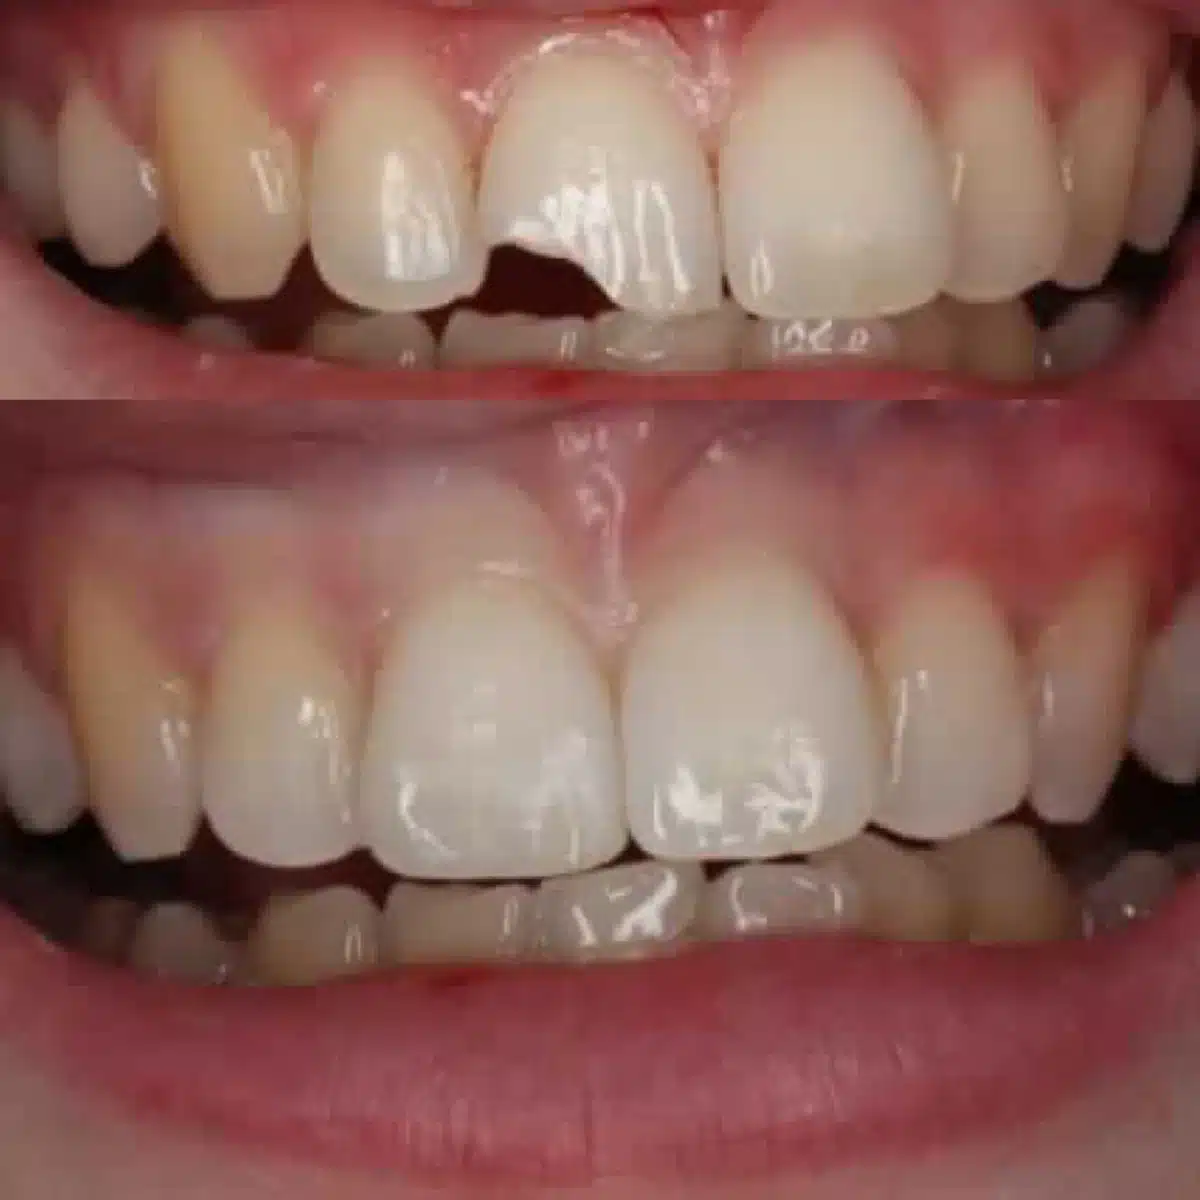 Chipped tooth before and after composite resin